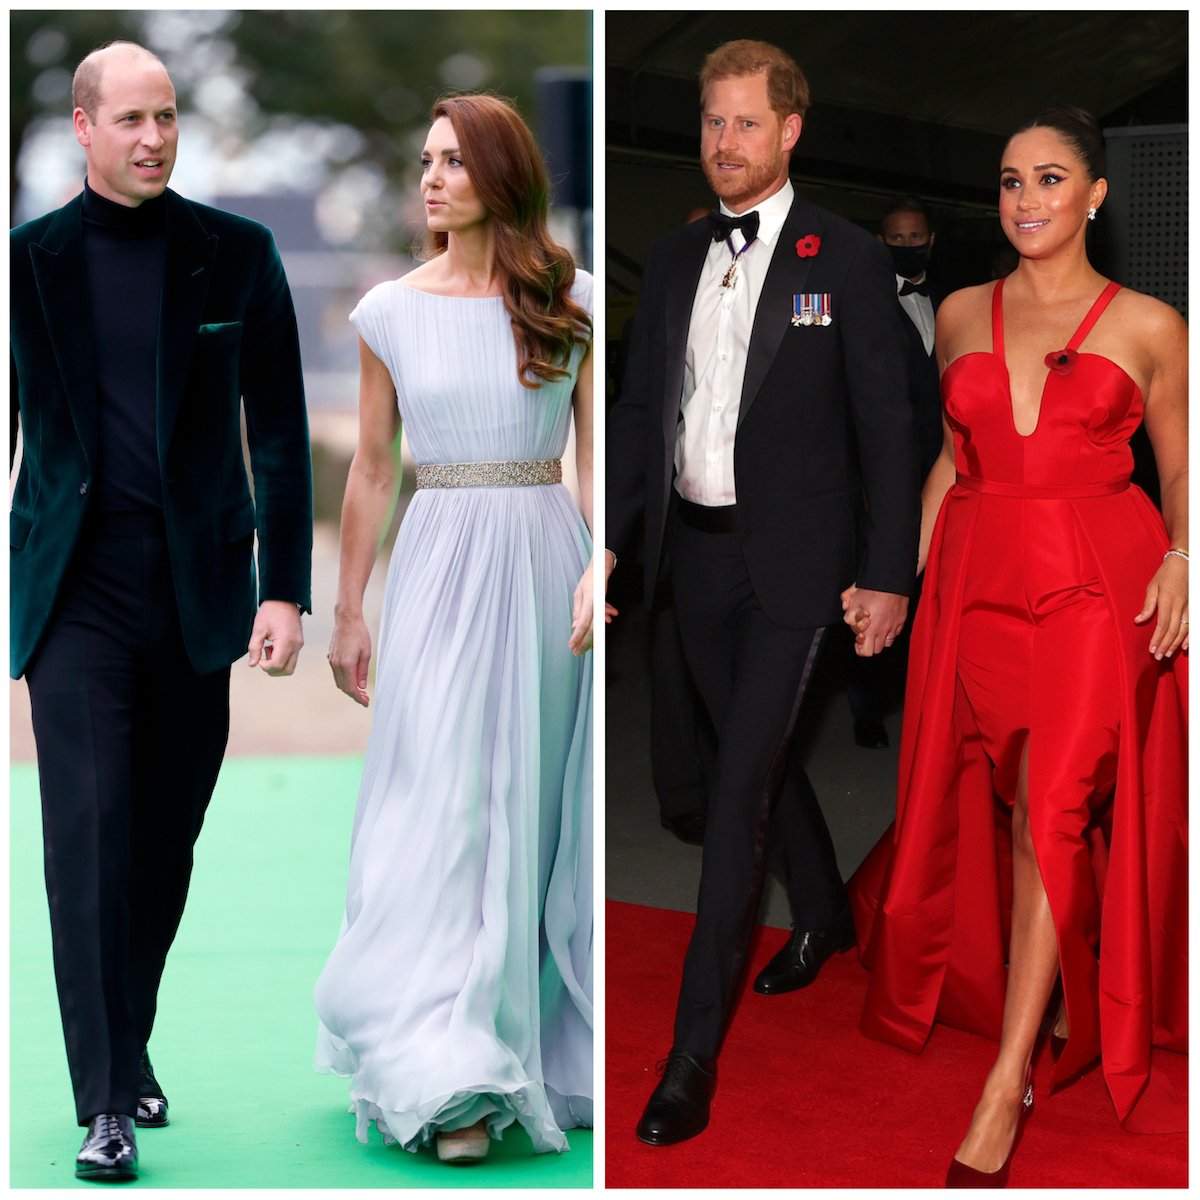 Prince William and Kate Middleton in 2021 at the Earthshot Prize Awards; Prince Harry and Meghan Markle at the 2021 Salute to Freedom Gala, for whom a commentator says gala events in December 2022 show the 'Sussex story in a nutshell'